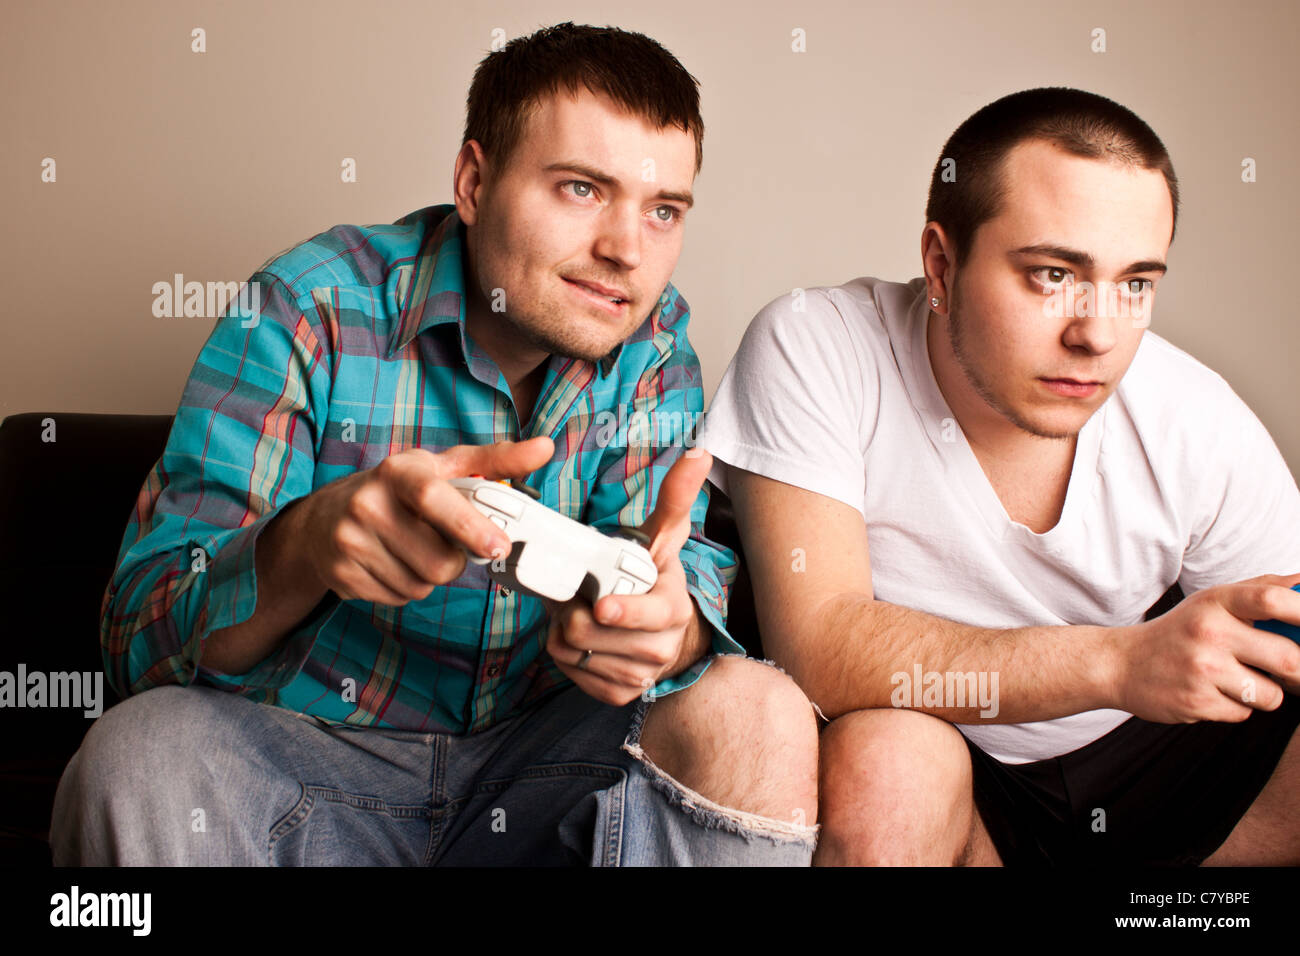 Two attractive guys concentrating while playing video games Stock Photo